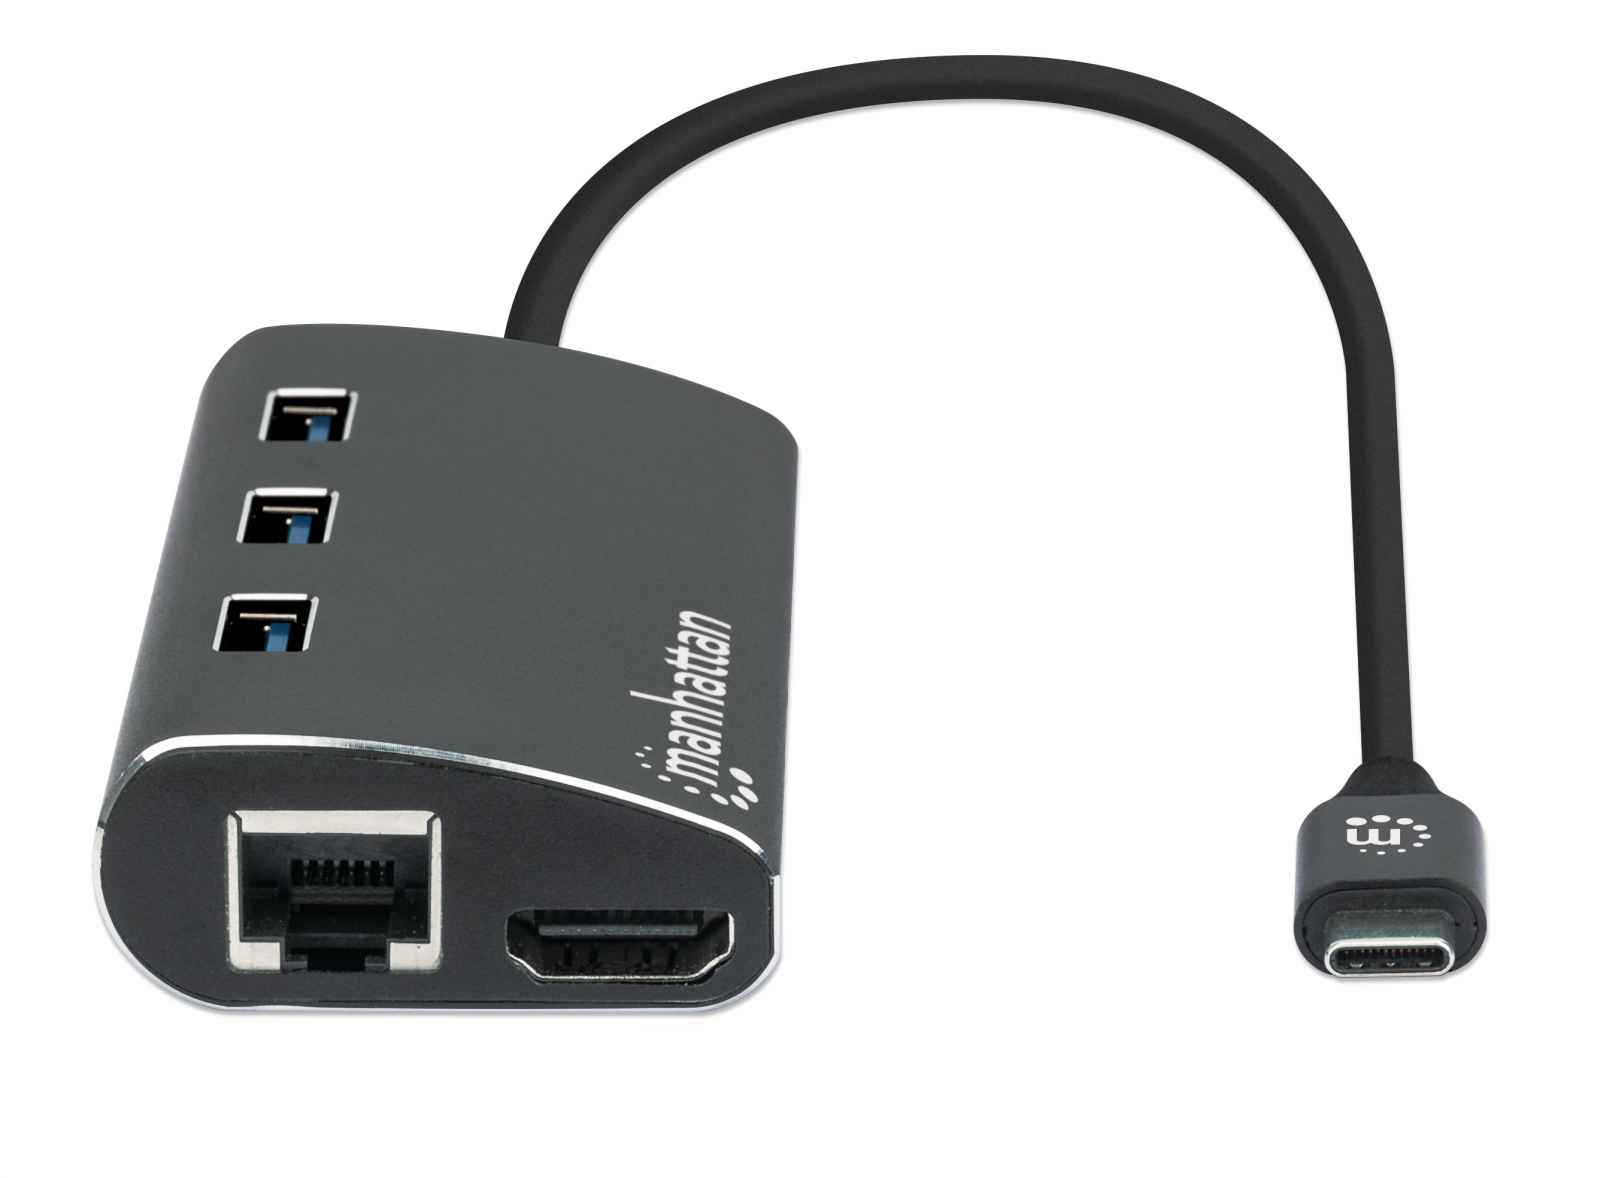 Manhattan USB-C Hub/Dock/Converter, USB-C to USB-C (including Power Delivery), HDMI 4K, 3x USB-A and Gigabit RJ45 Ports with Card Reader, Male to Females, 5 Gbps (USB 3.2 Gen1 aka USB 3.0), HDMI 4K@30Hz, 1x Ethernet 10/100/1000 Mbps network, SD/Micro SD,